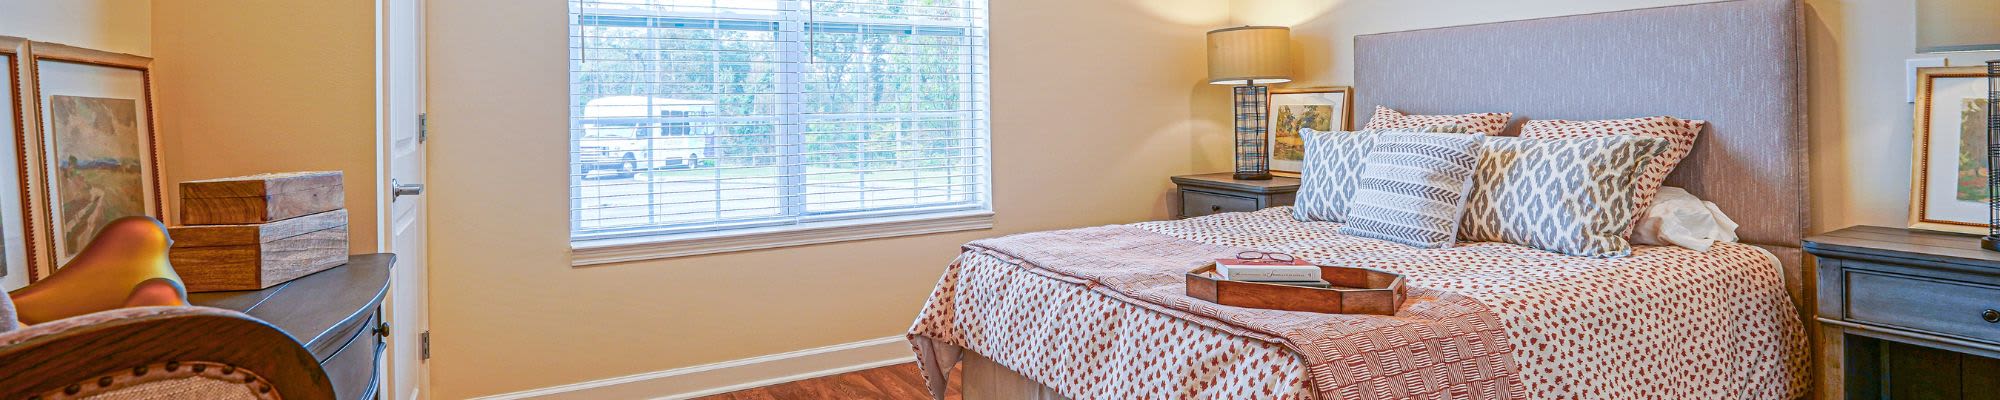 Independent living apartment at Harmony at West Ashley in Charleston, South Carolina